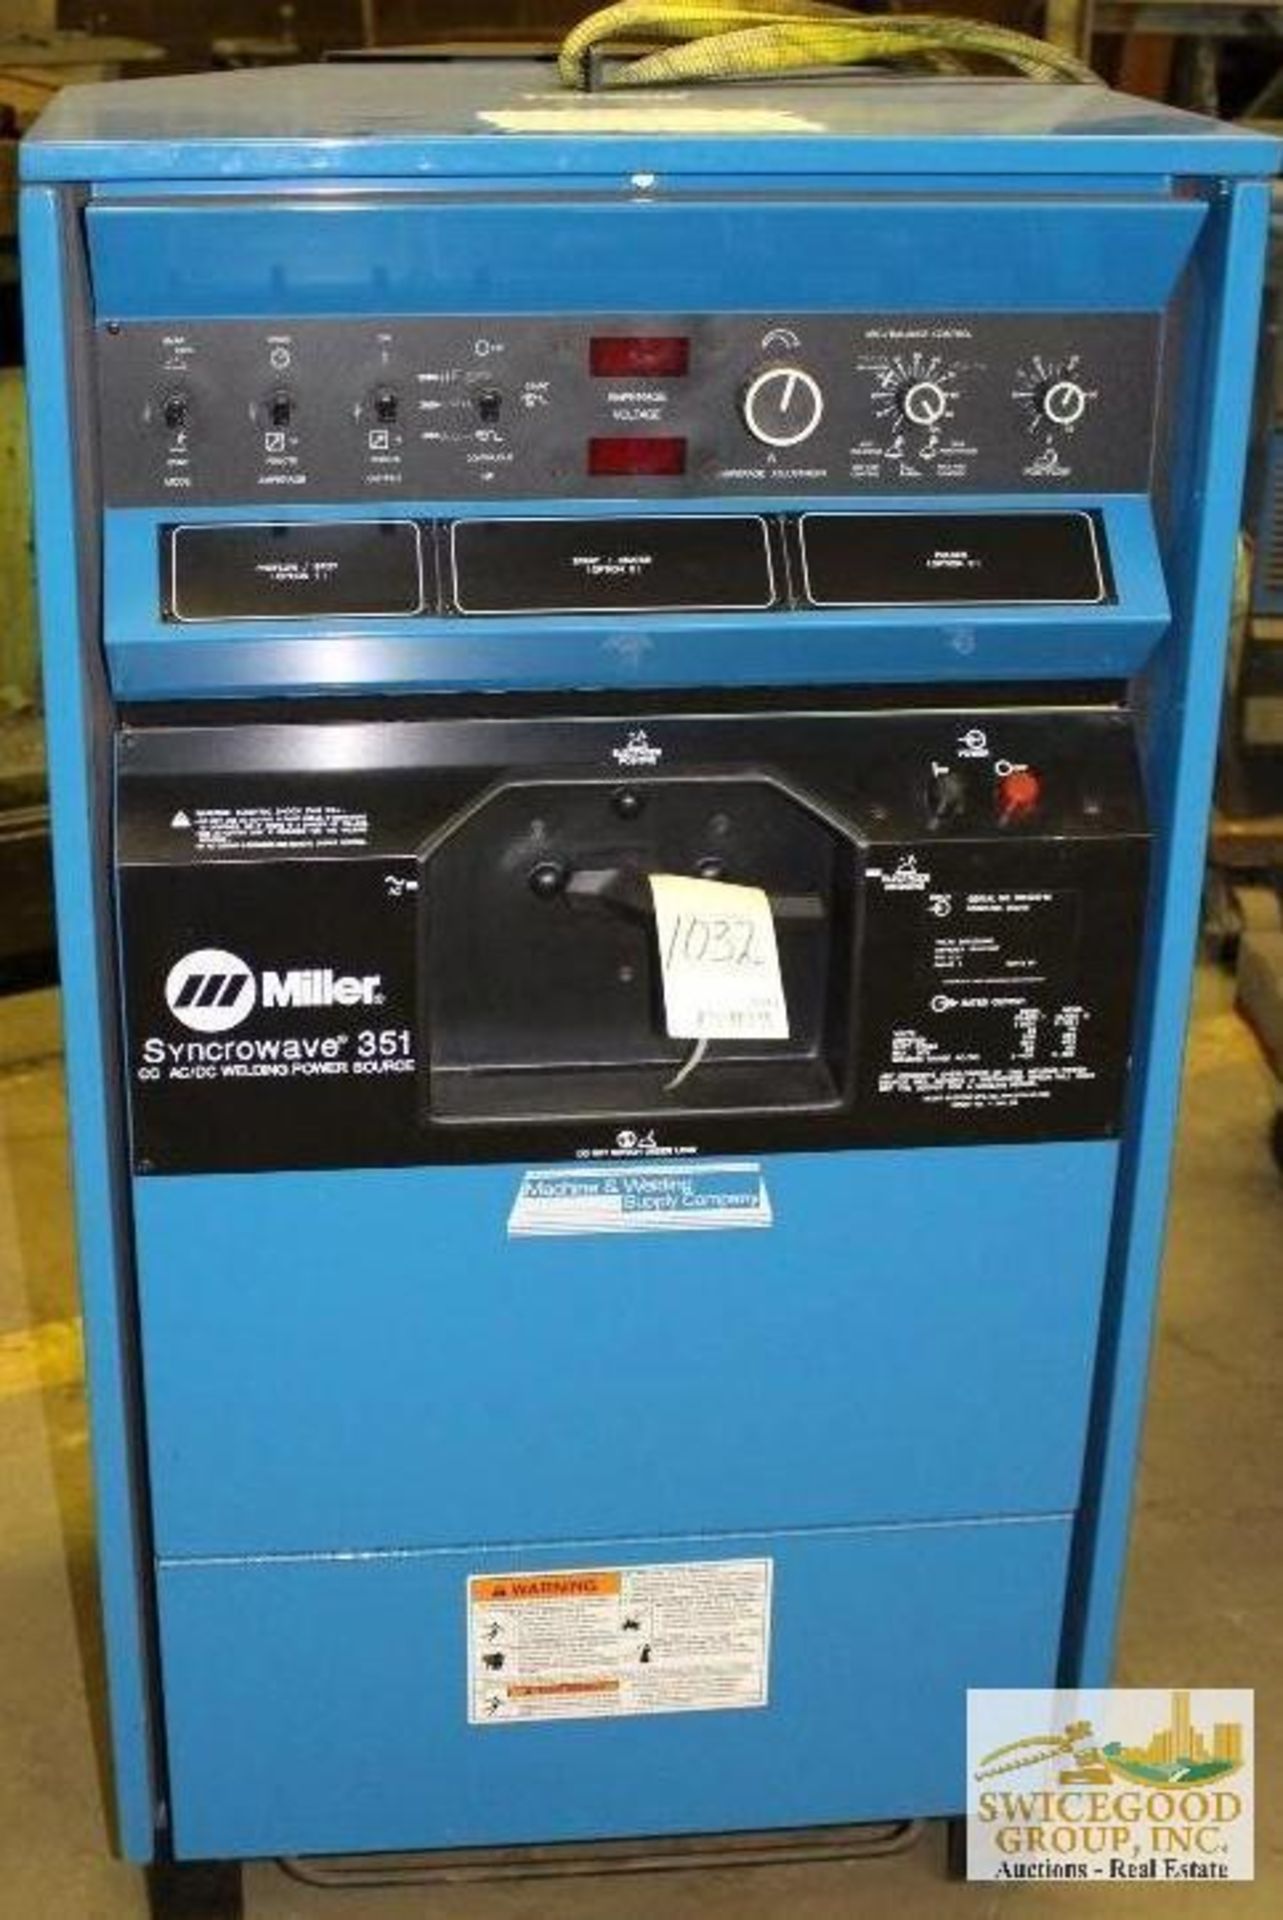 ***NEW*** Miller Syncrowave 351